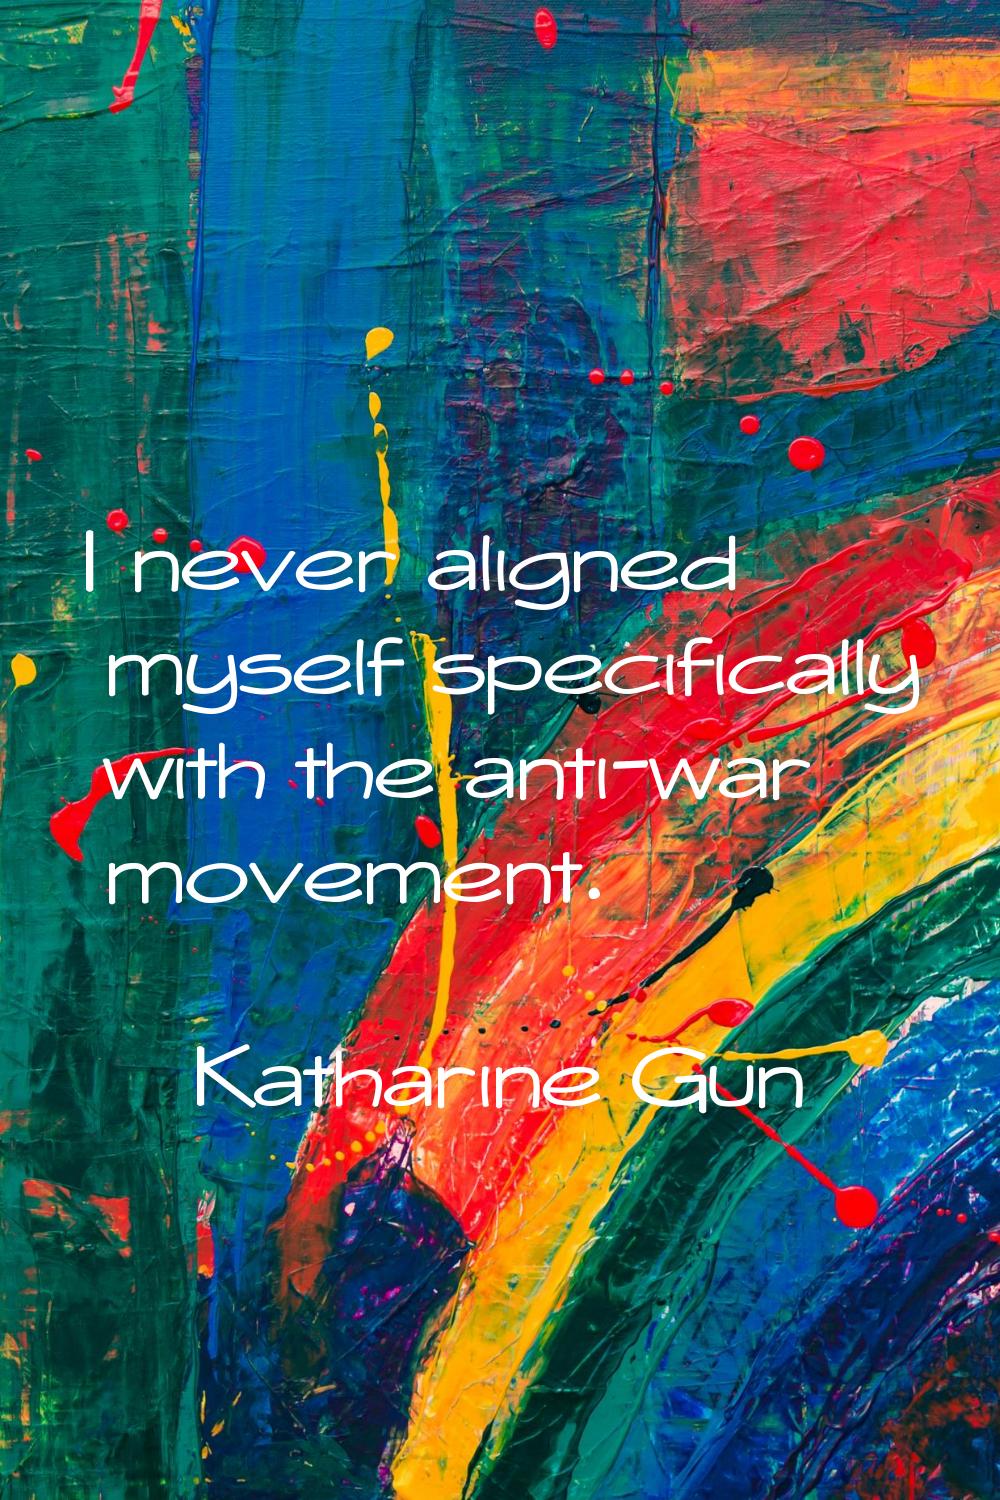 I never aligned myself specifically with the anti-war movement.